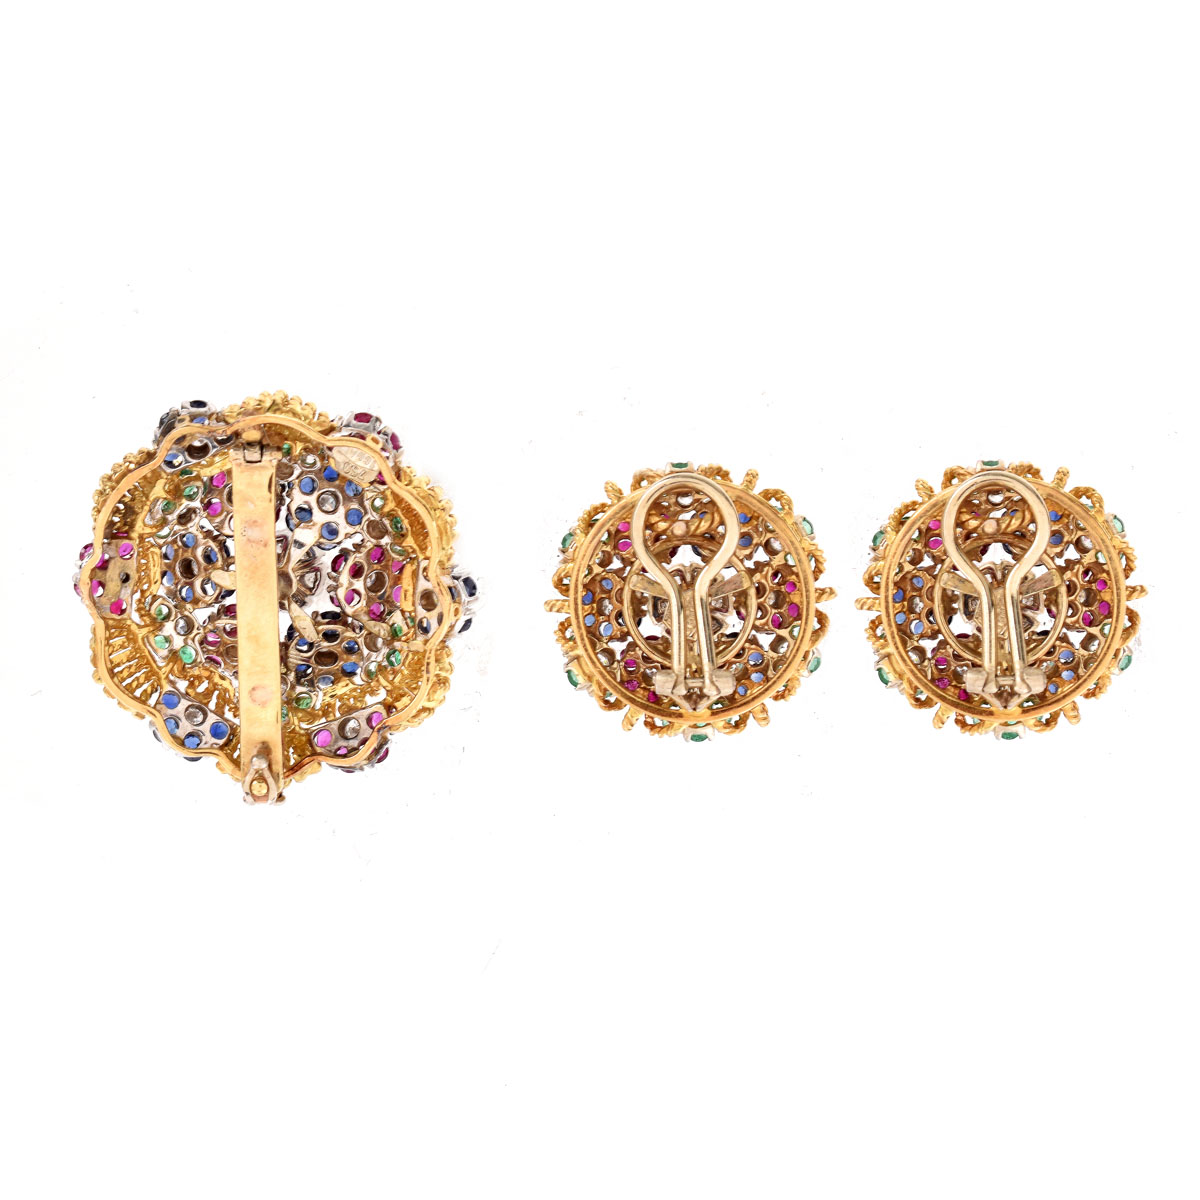 Vintage Italian Lunati Diamond, Emerald, Sapphire, Ruby and 18 Karat Yellow Gold Brooch and Earring Suite en tremblant. Fine quality stones throughout.